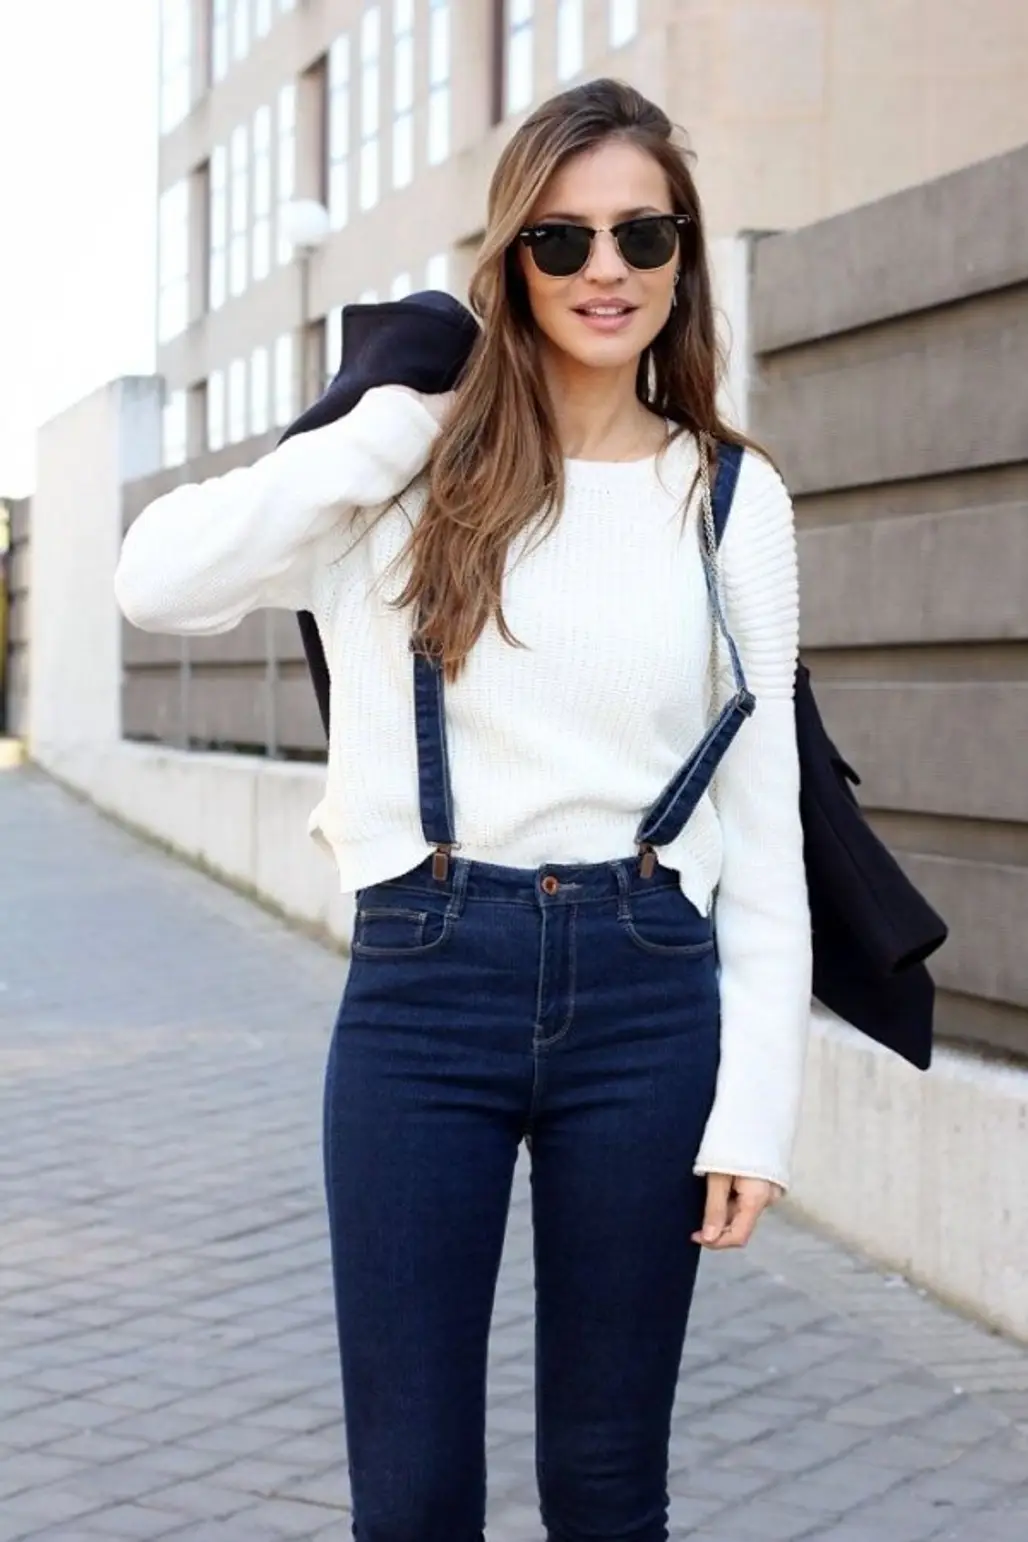 Black Suspenders with White Pants Outfits (3 ideas & outfits